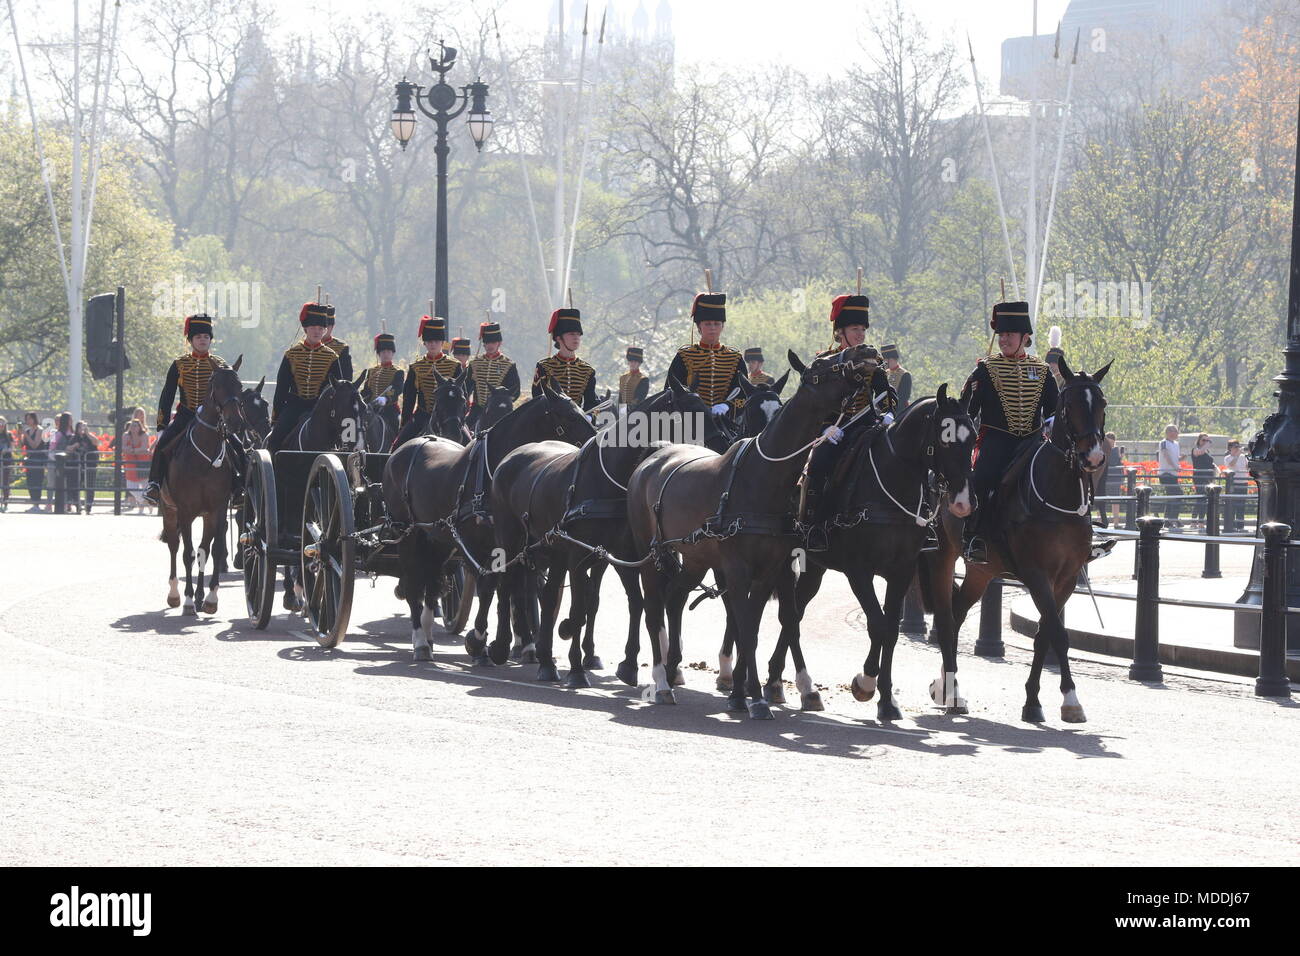 Members of the King's Troop Royal Horse Artillery ride out in front of Buckingham Palace en route to Green Park for the 53 Gun Salute which will mark the official opening of the Commonwealth Heads of Government Meeting. Stock Photo